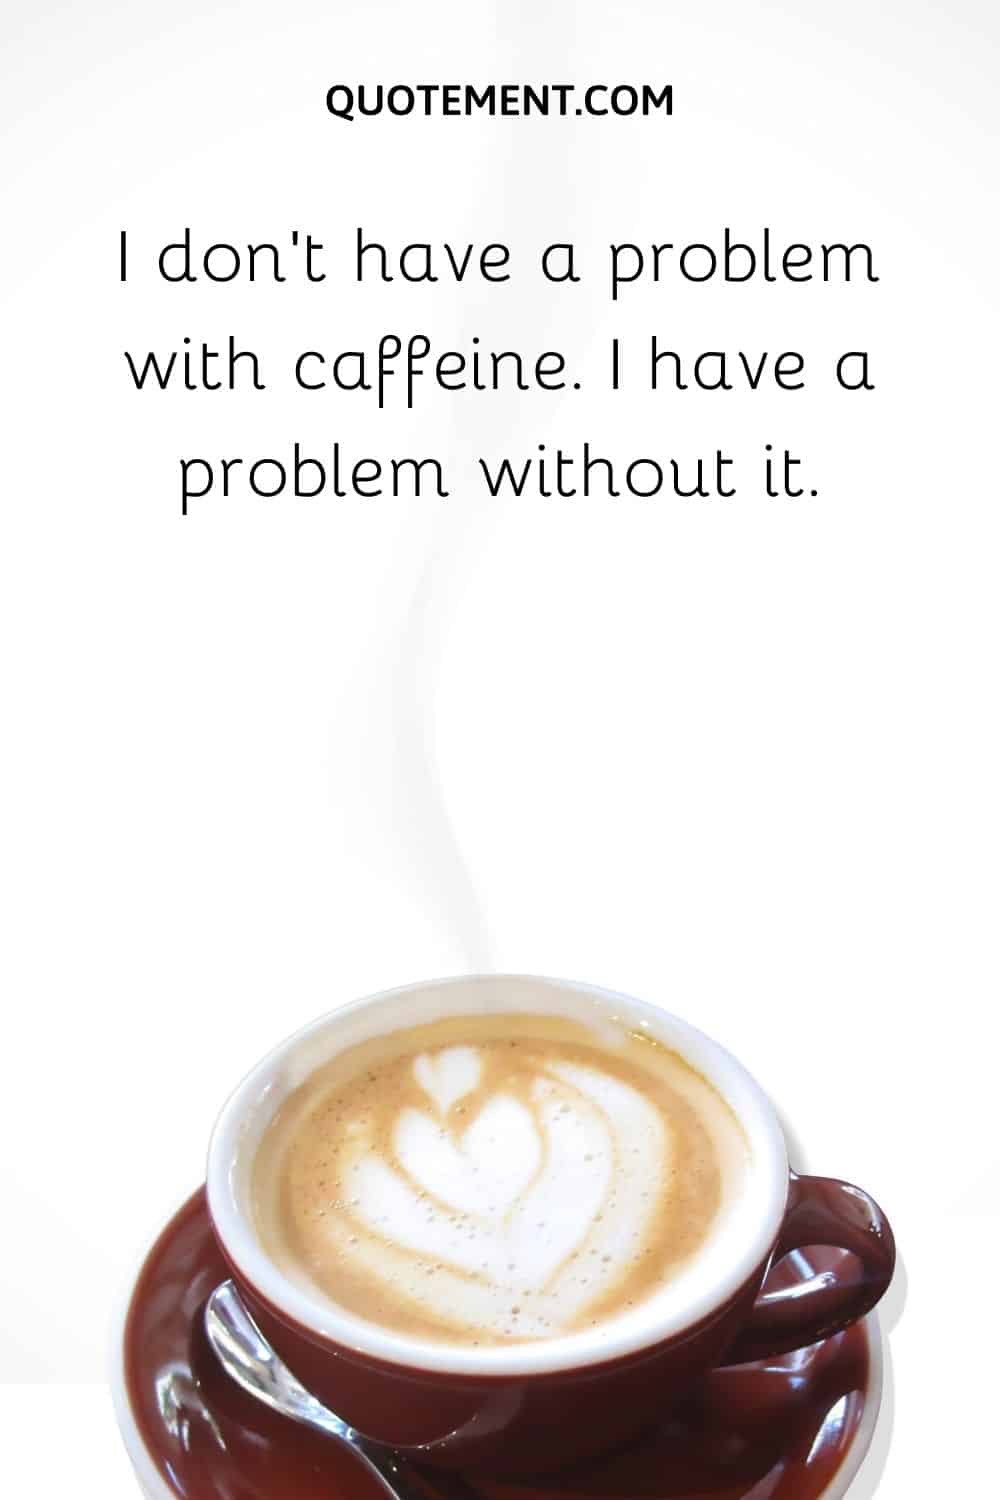 I don’t have a problem with caffeine. I have a problem without it